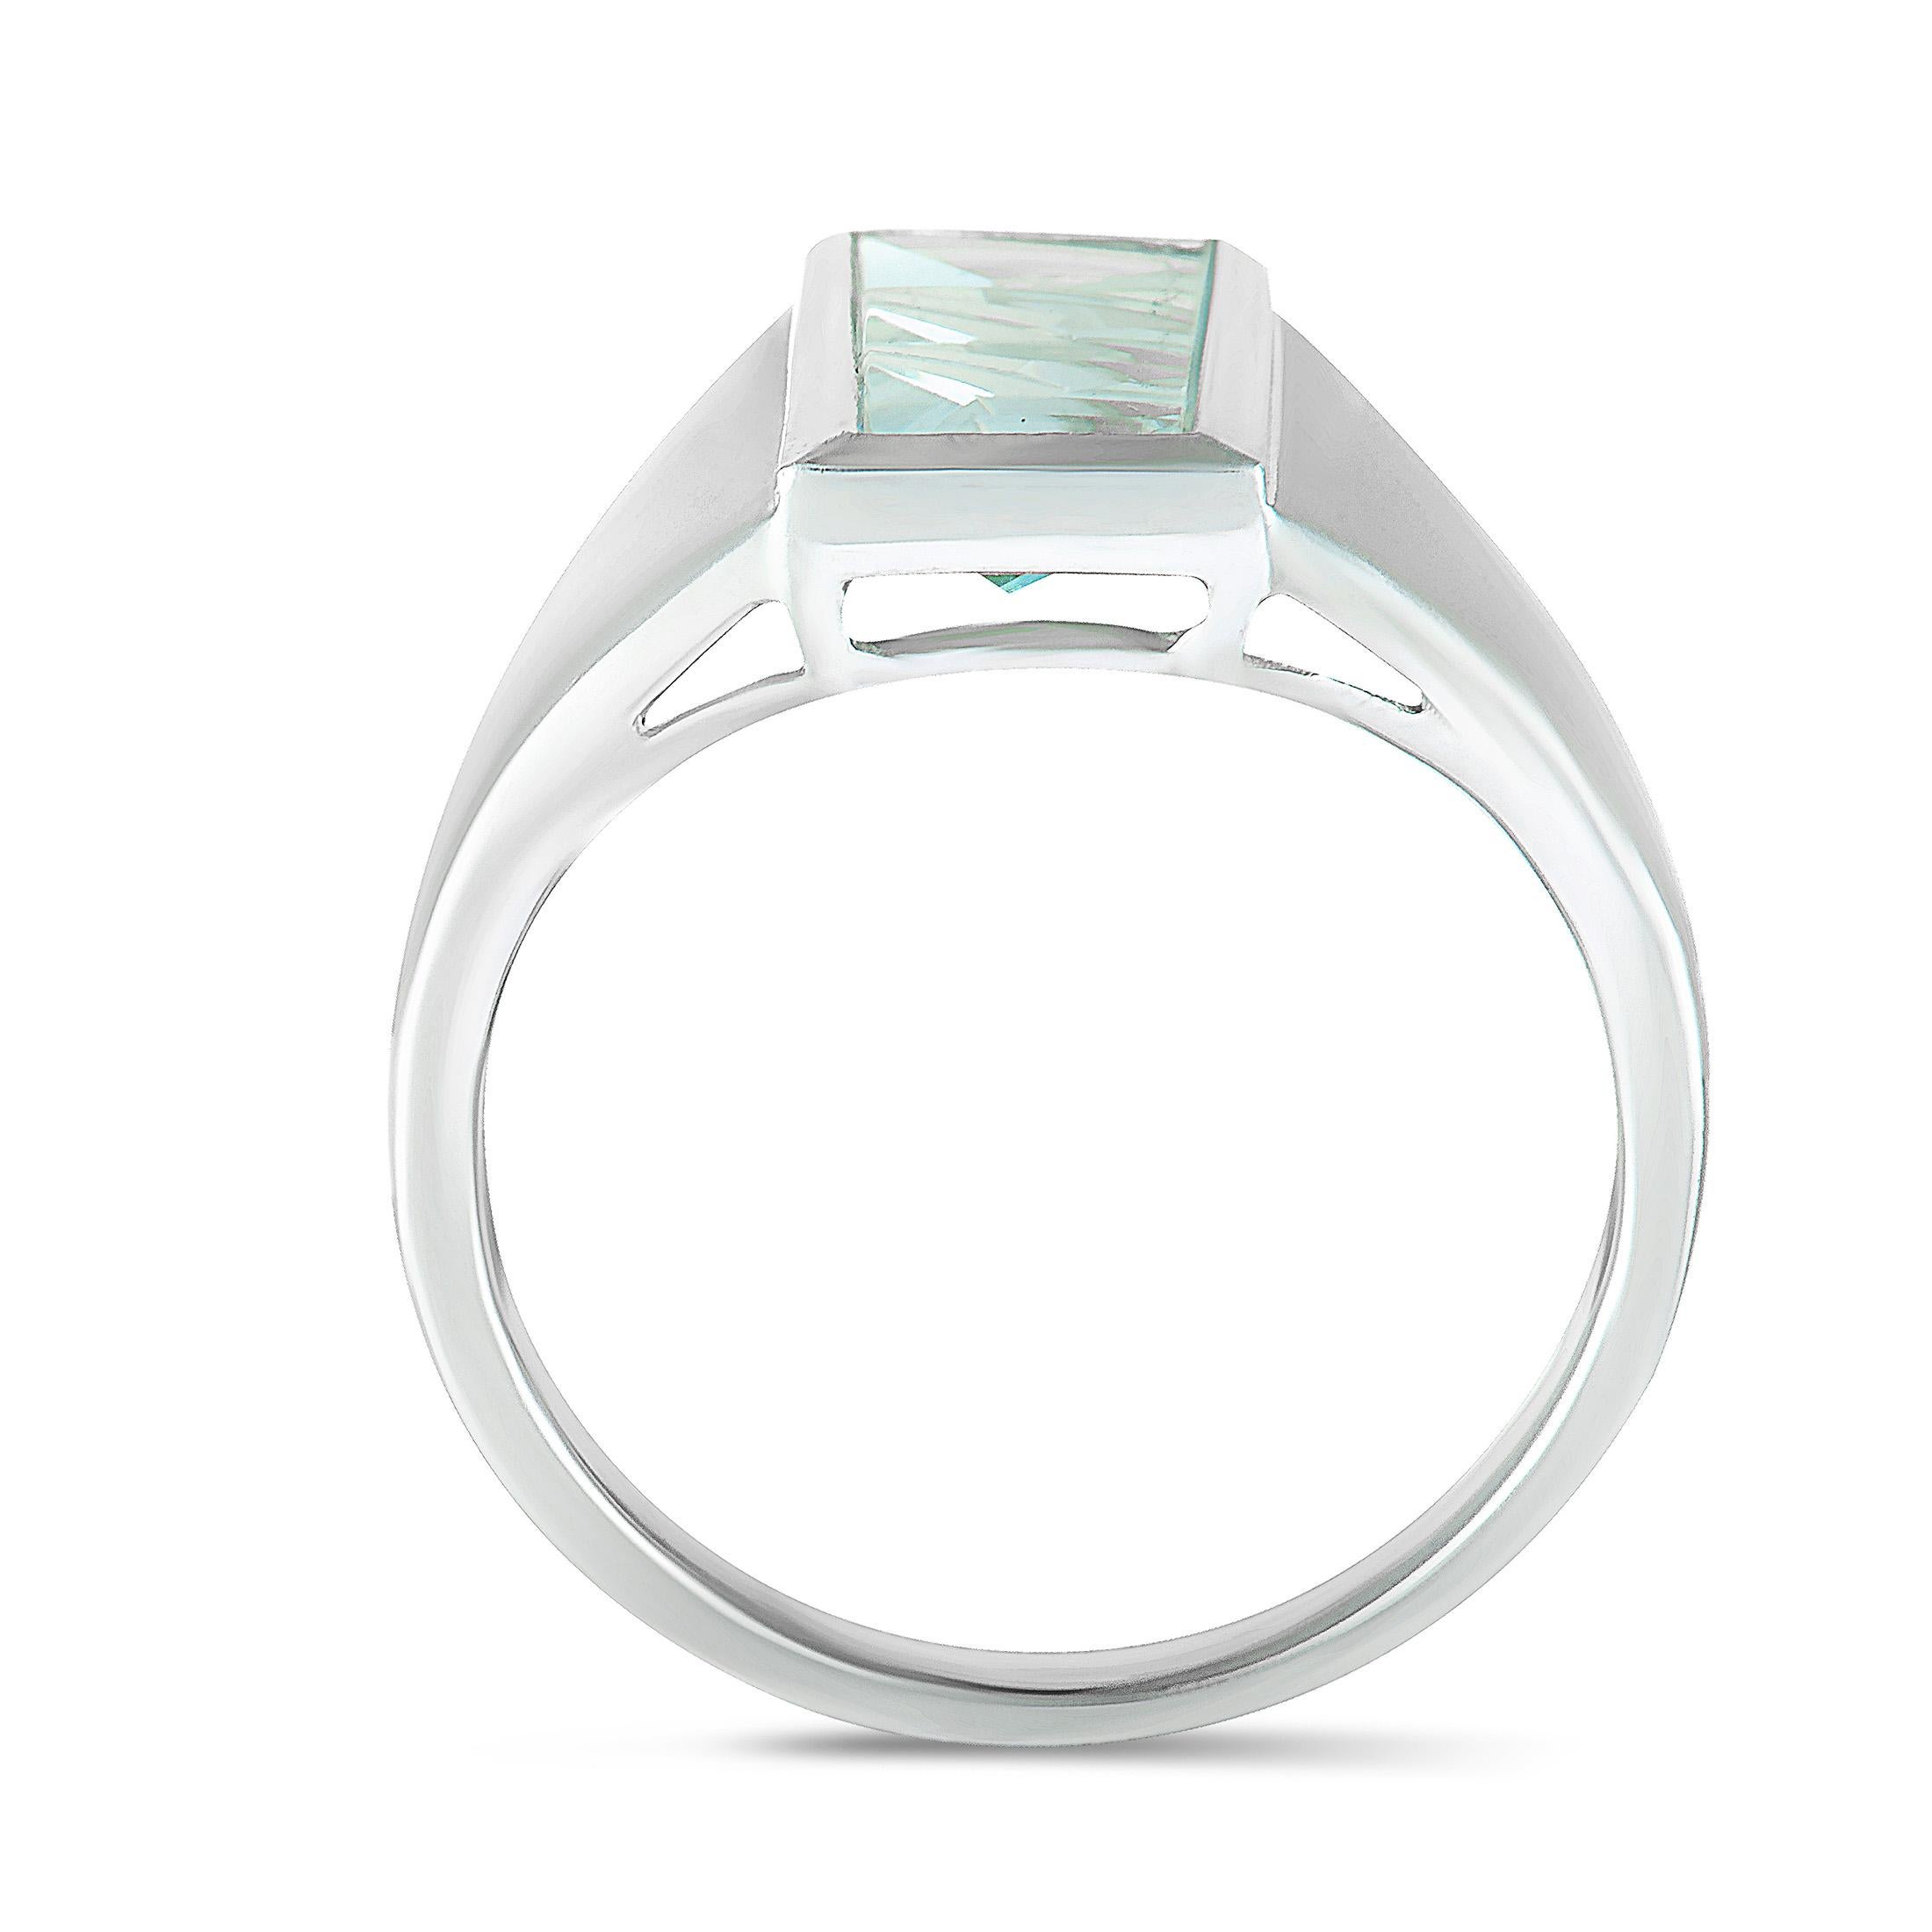 The elegant gleam of 18K white gold is given a sublime touch of enticing glisten by the expertly cut aquamarine in this extraordinarily stylized jewelry piece designed by Tom Munsteiner. The aquamarine weighs 3.10 carats.
Ring Size: 10.75
Included